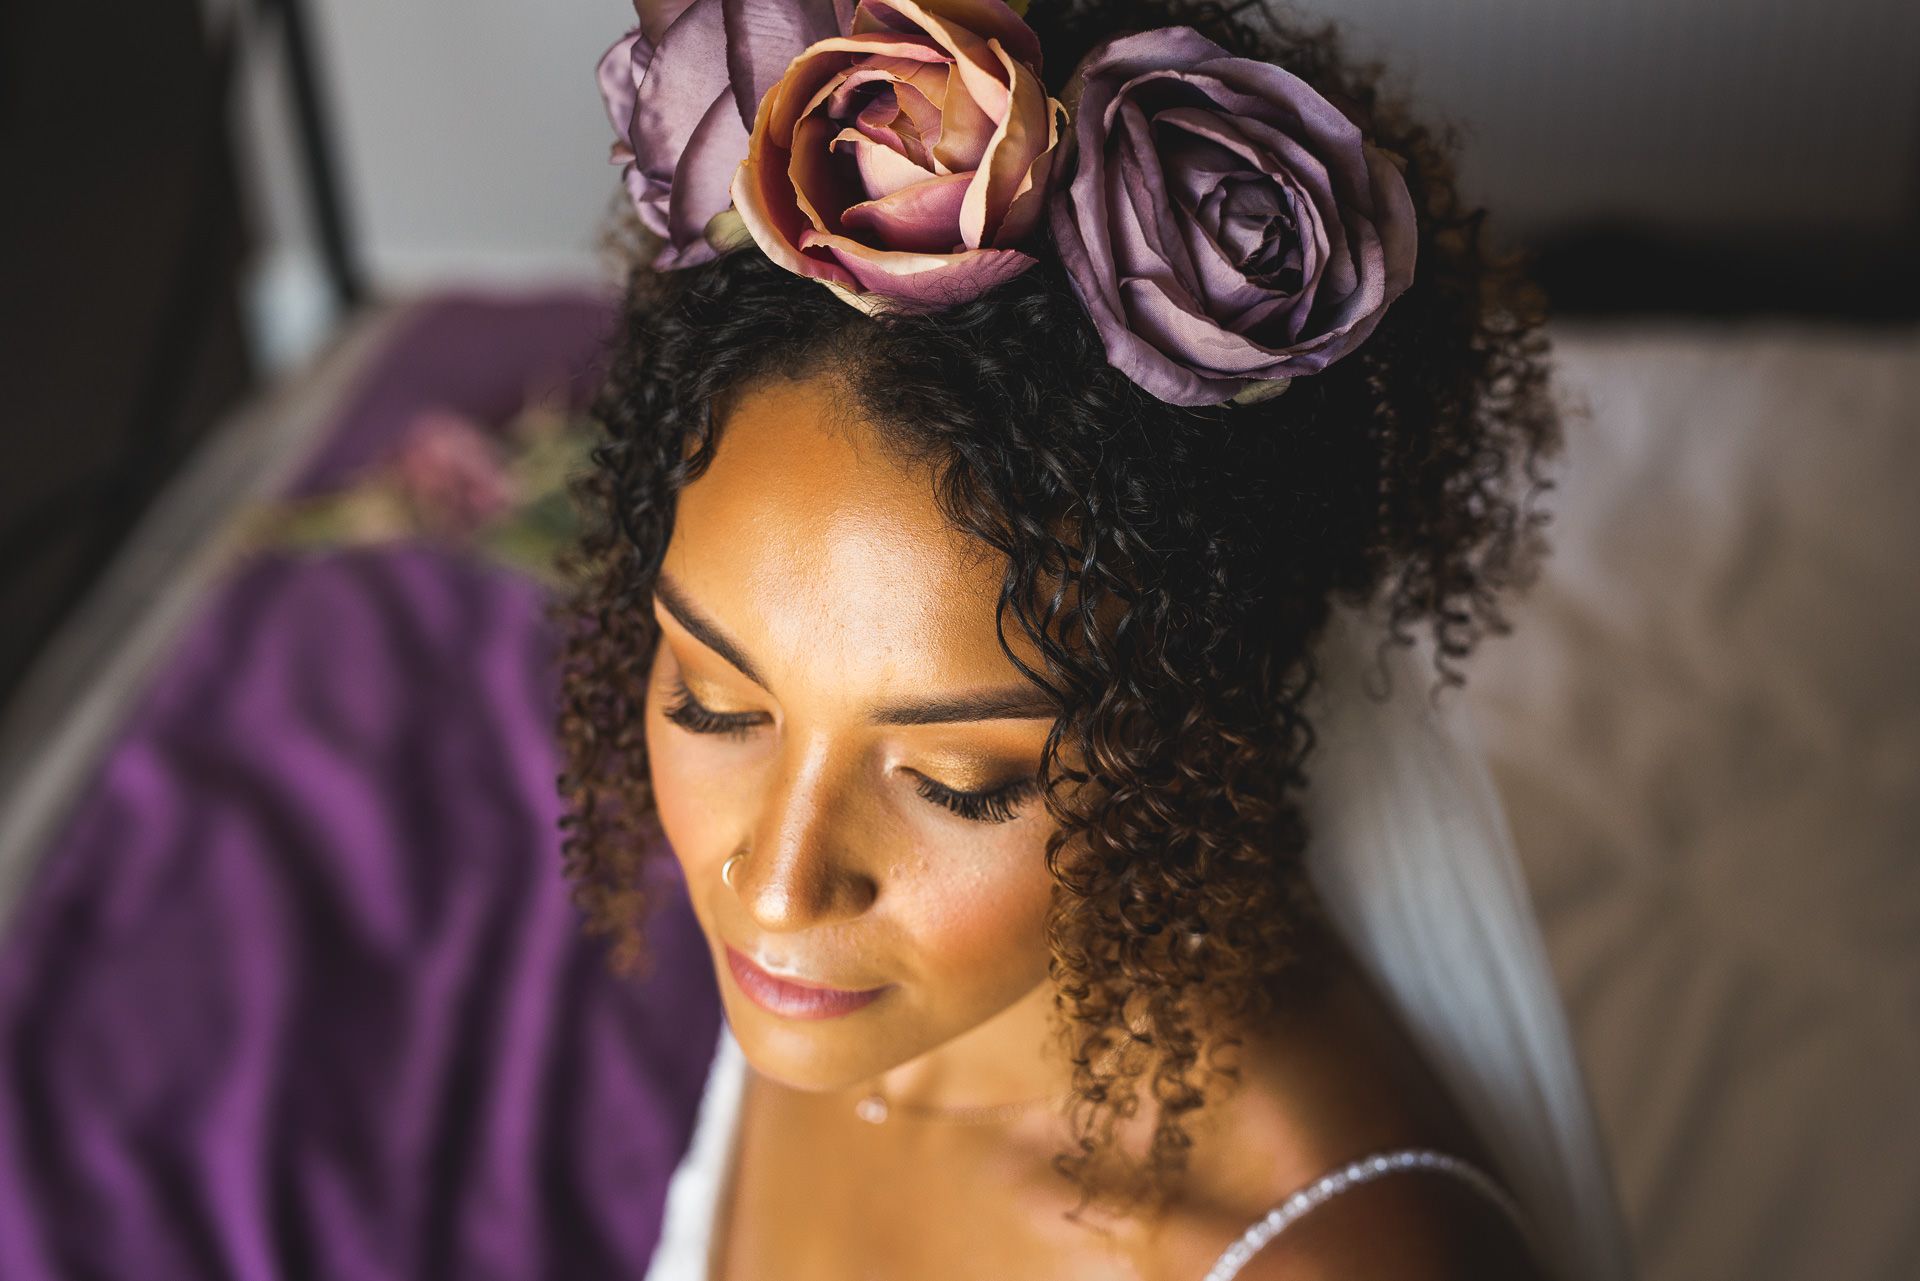 bridal portrait from showing the brides floral tiara